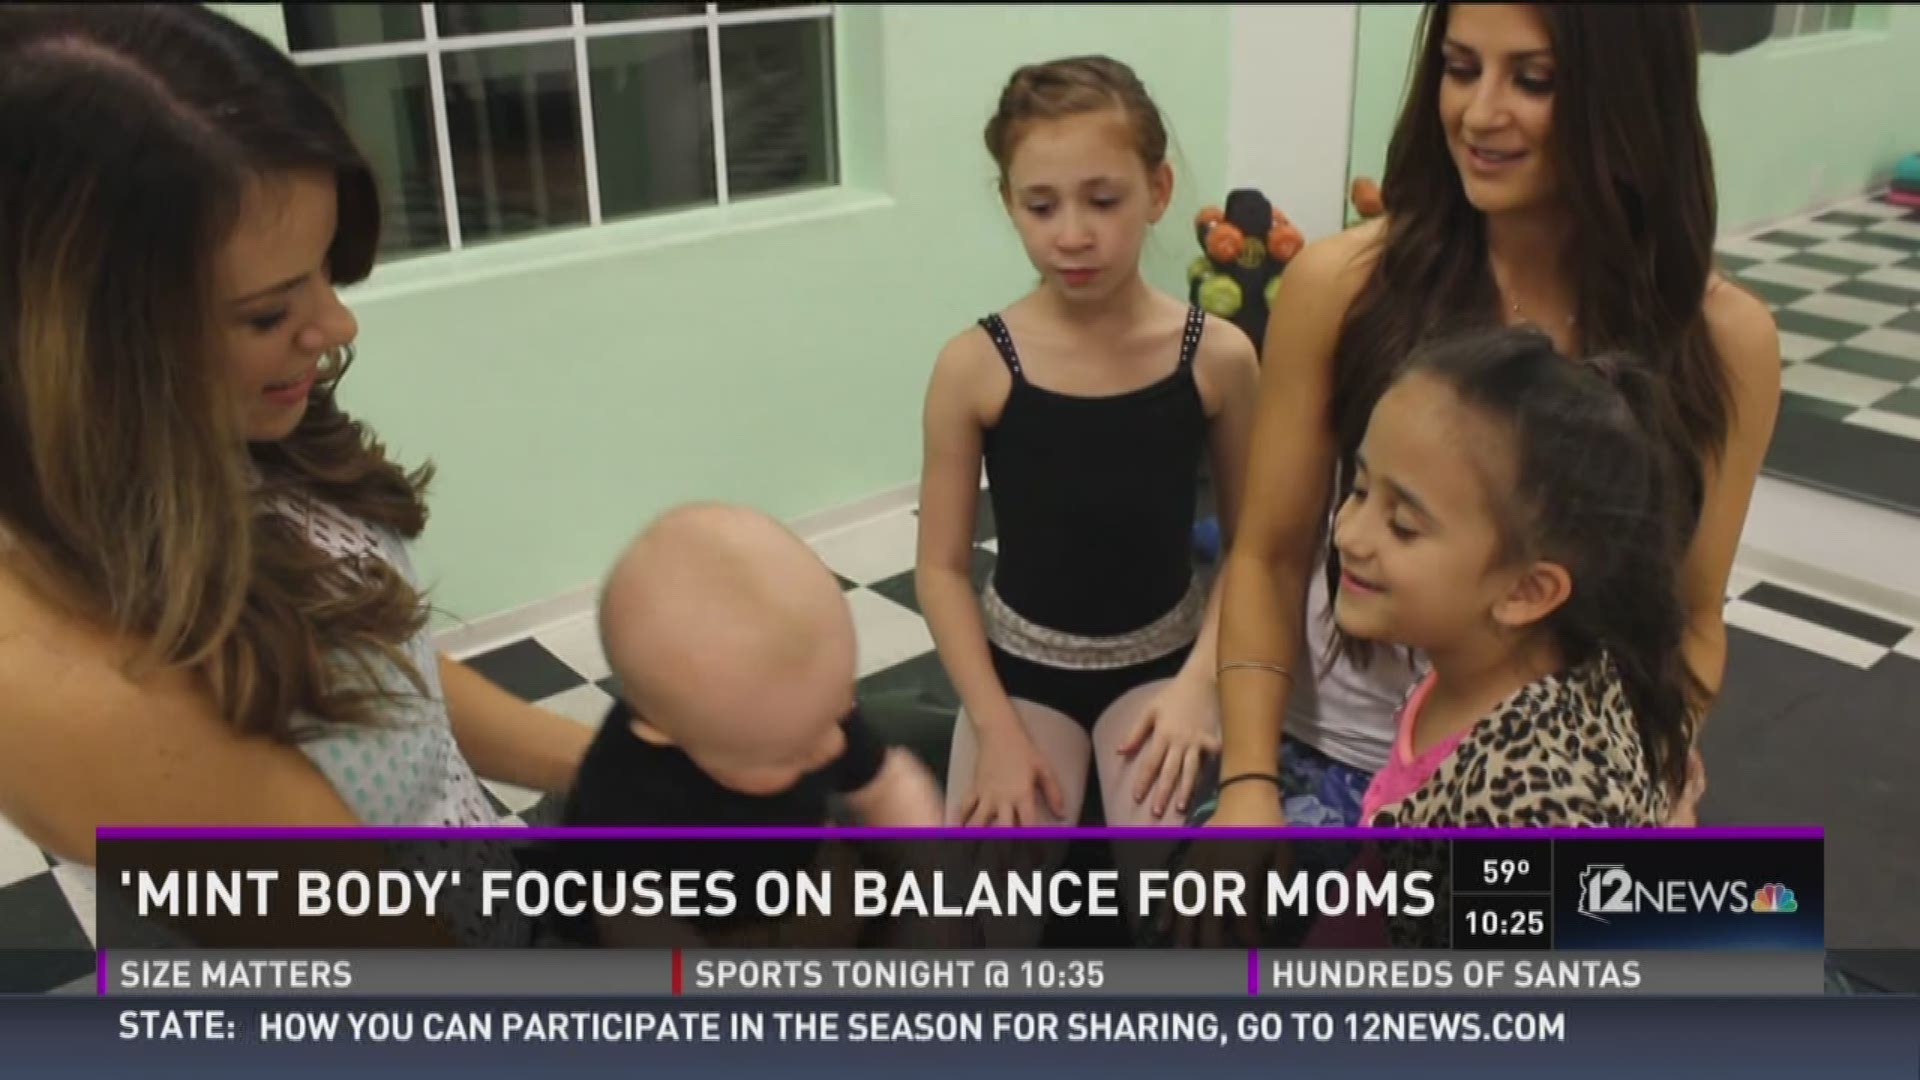 December is Health Check 12 month at 12 news, focusing on a happier, healthier lifestyle. Two moms in gilbert are doing just that, working to create their own brands to better others.